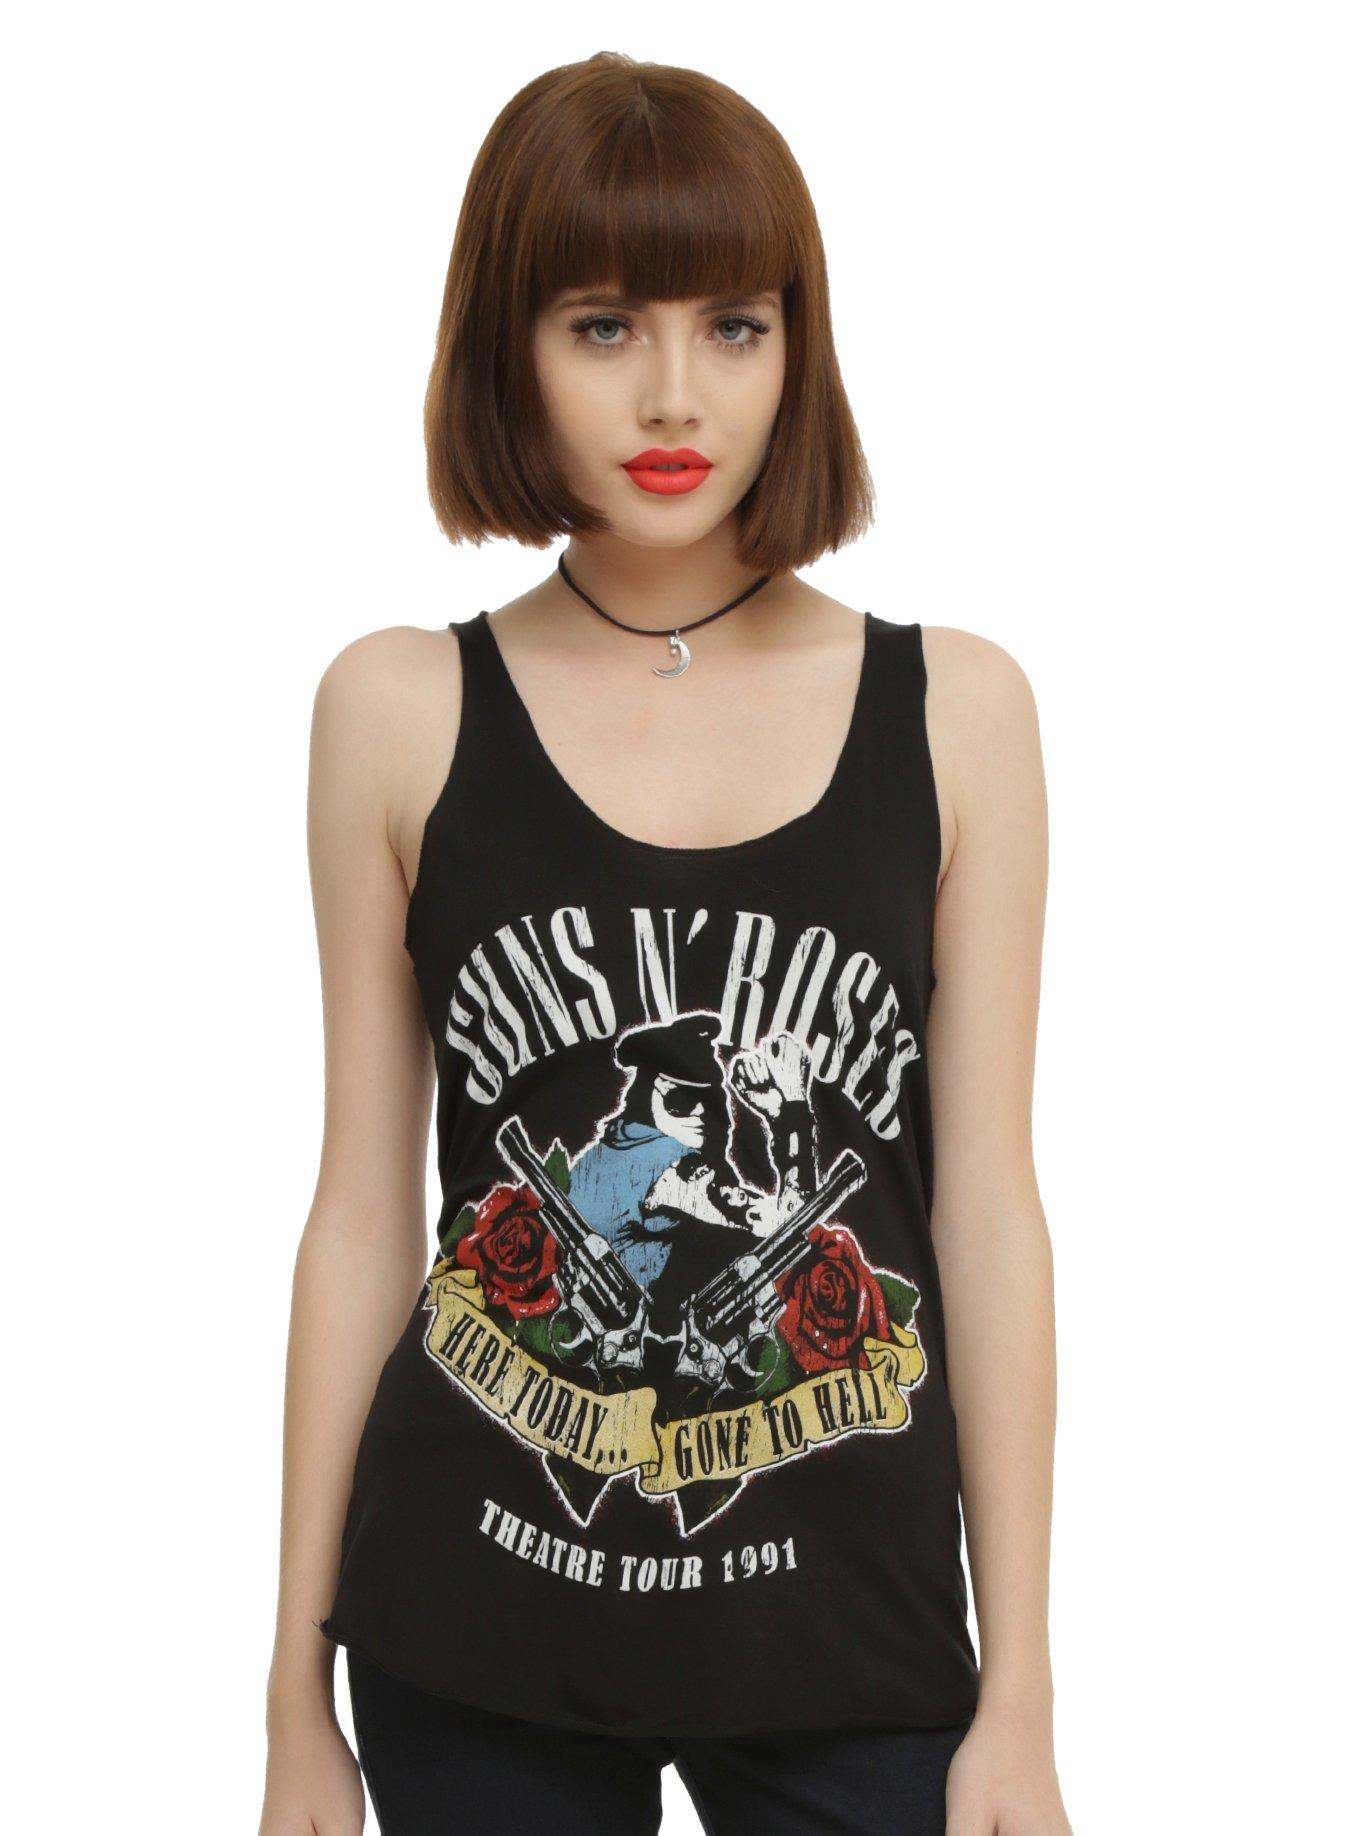 Guns N' Roses Here Today Gone To Hell Girls Tank Top, BLACK, hi-res